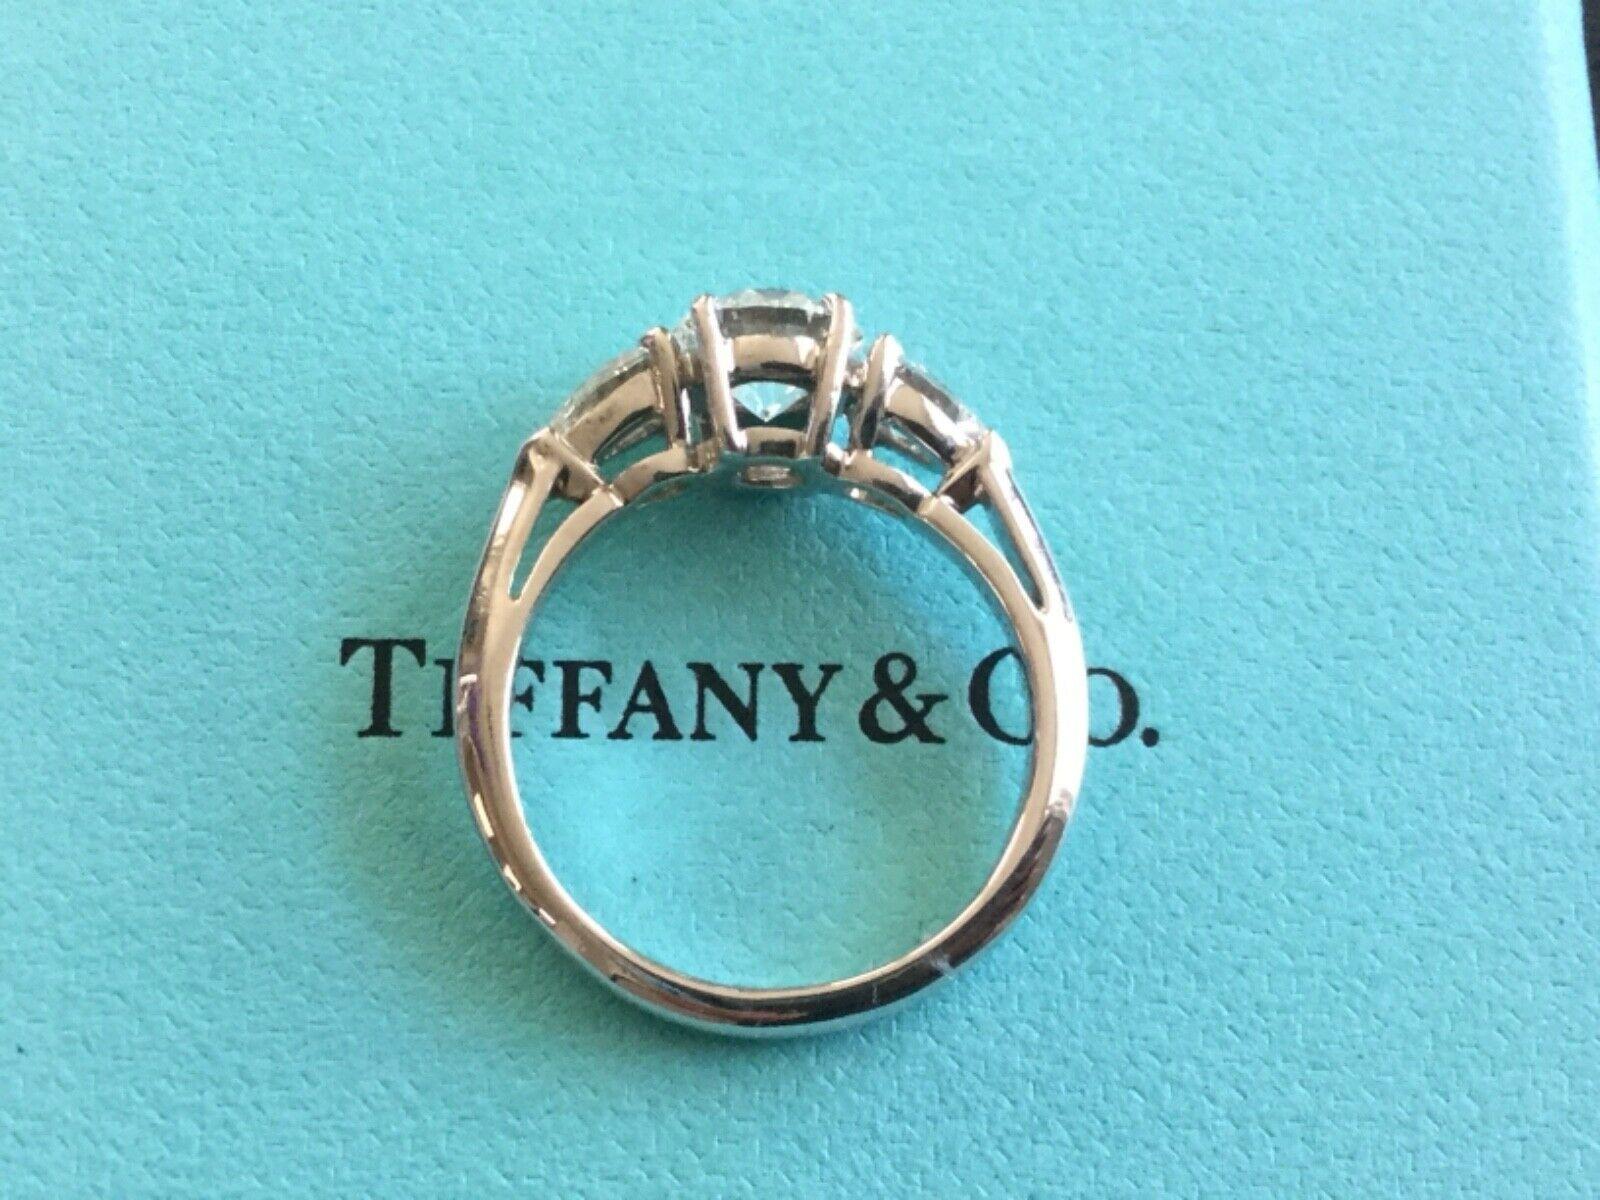 Tiffany & Co. 3-Stone Round and Pear Diamond Engagement Ring F VS1 In Excellent Condition For Sale In Middletown, DE